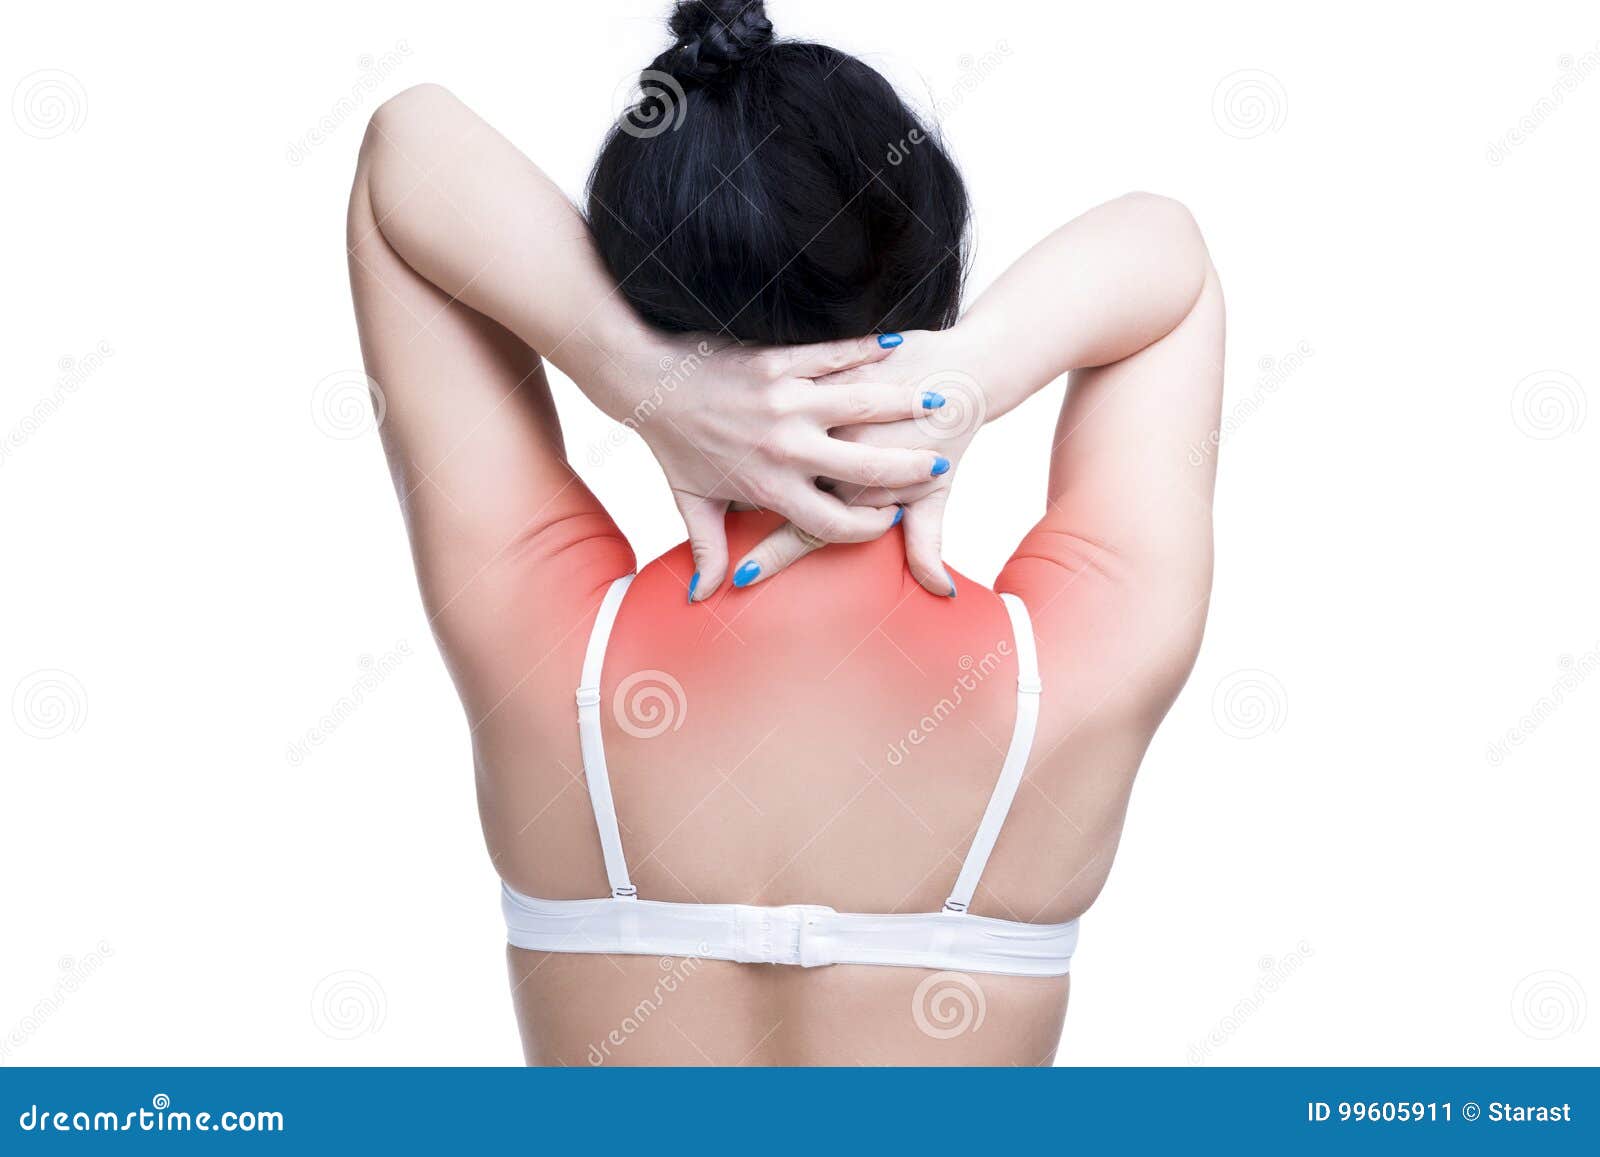 10 Bra Support Back Pain Royalty-Free Images, Stock Photos